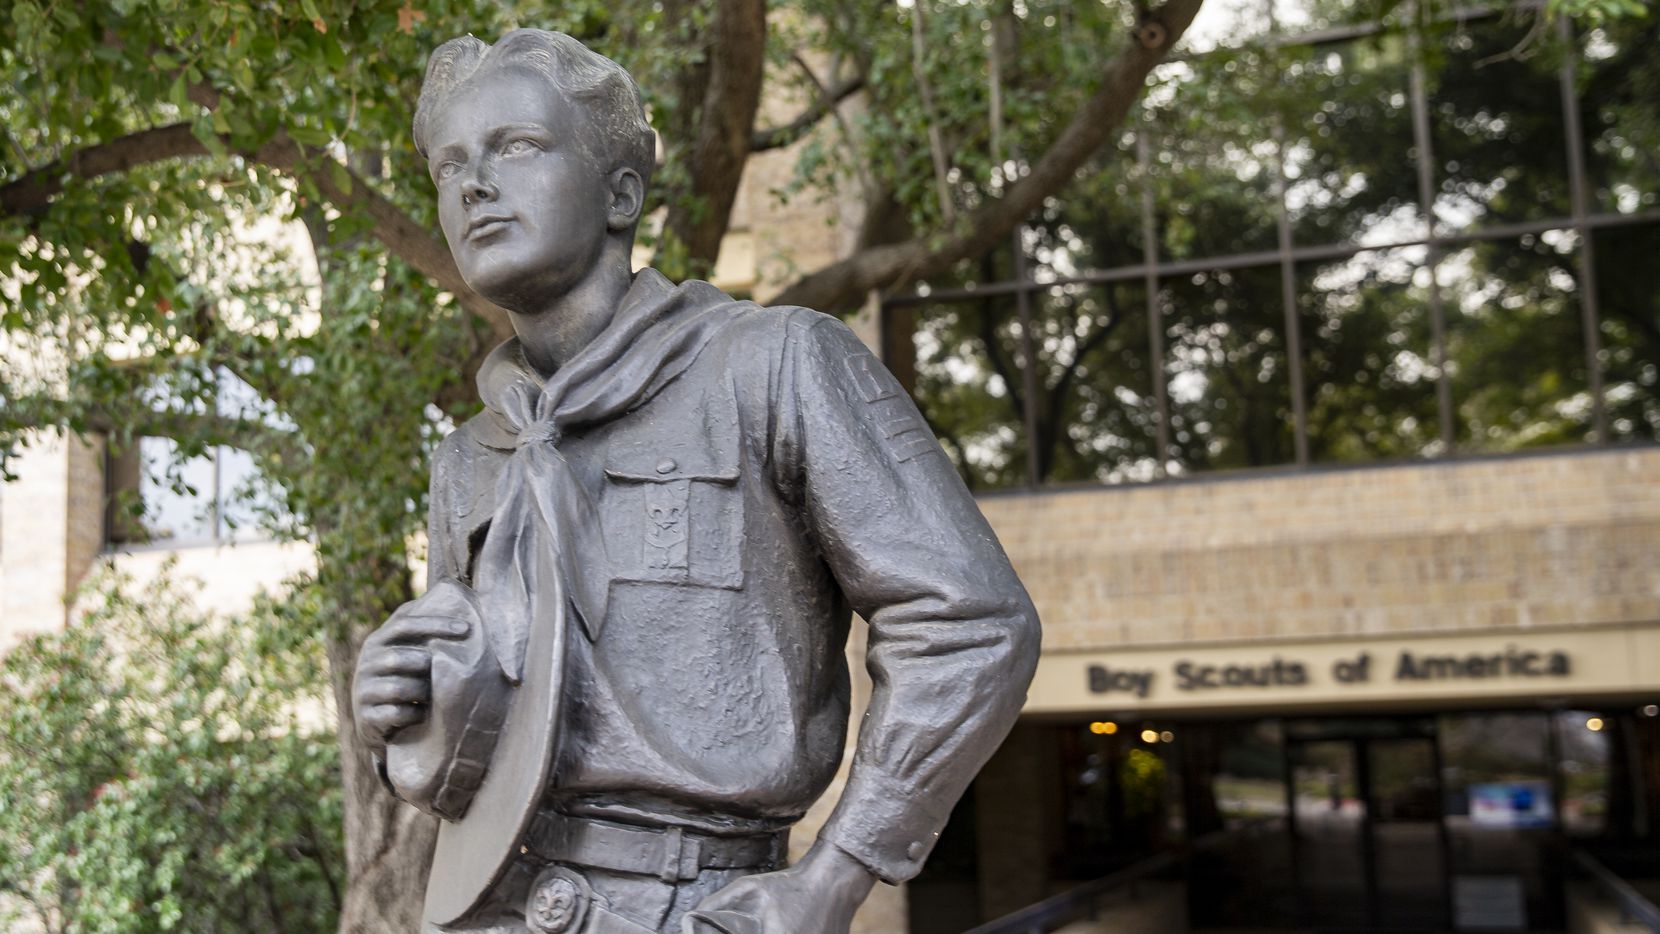 The Boy Scout statue outside of the Boy Scouts of America headquarters in Irving.